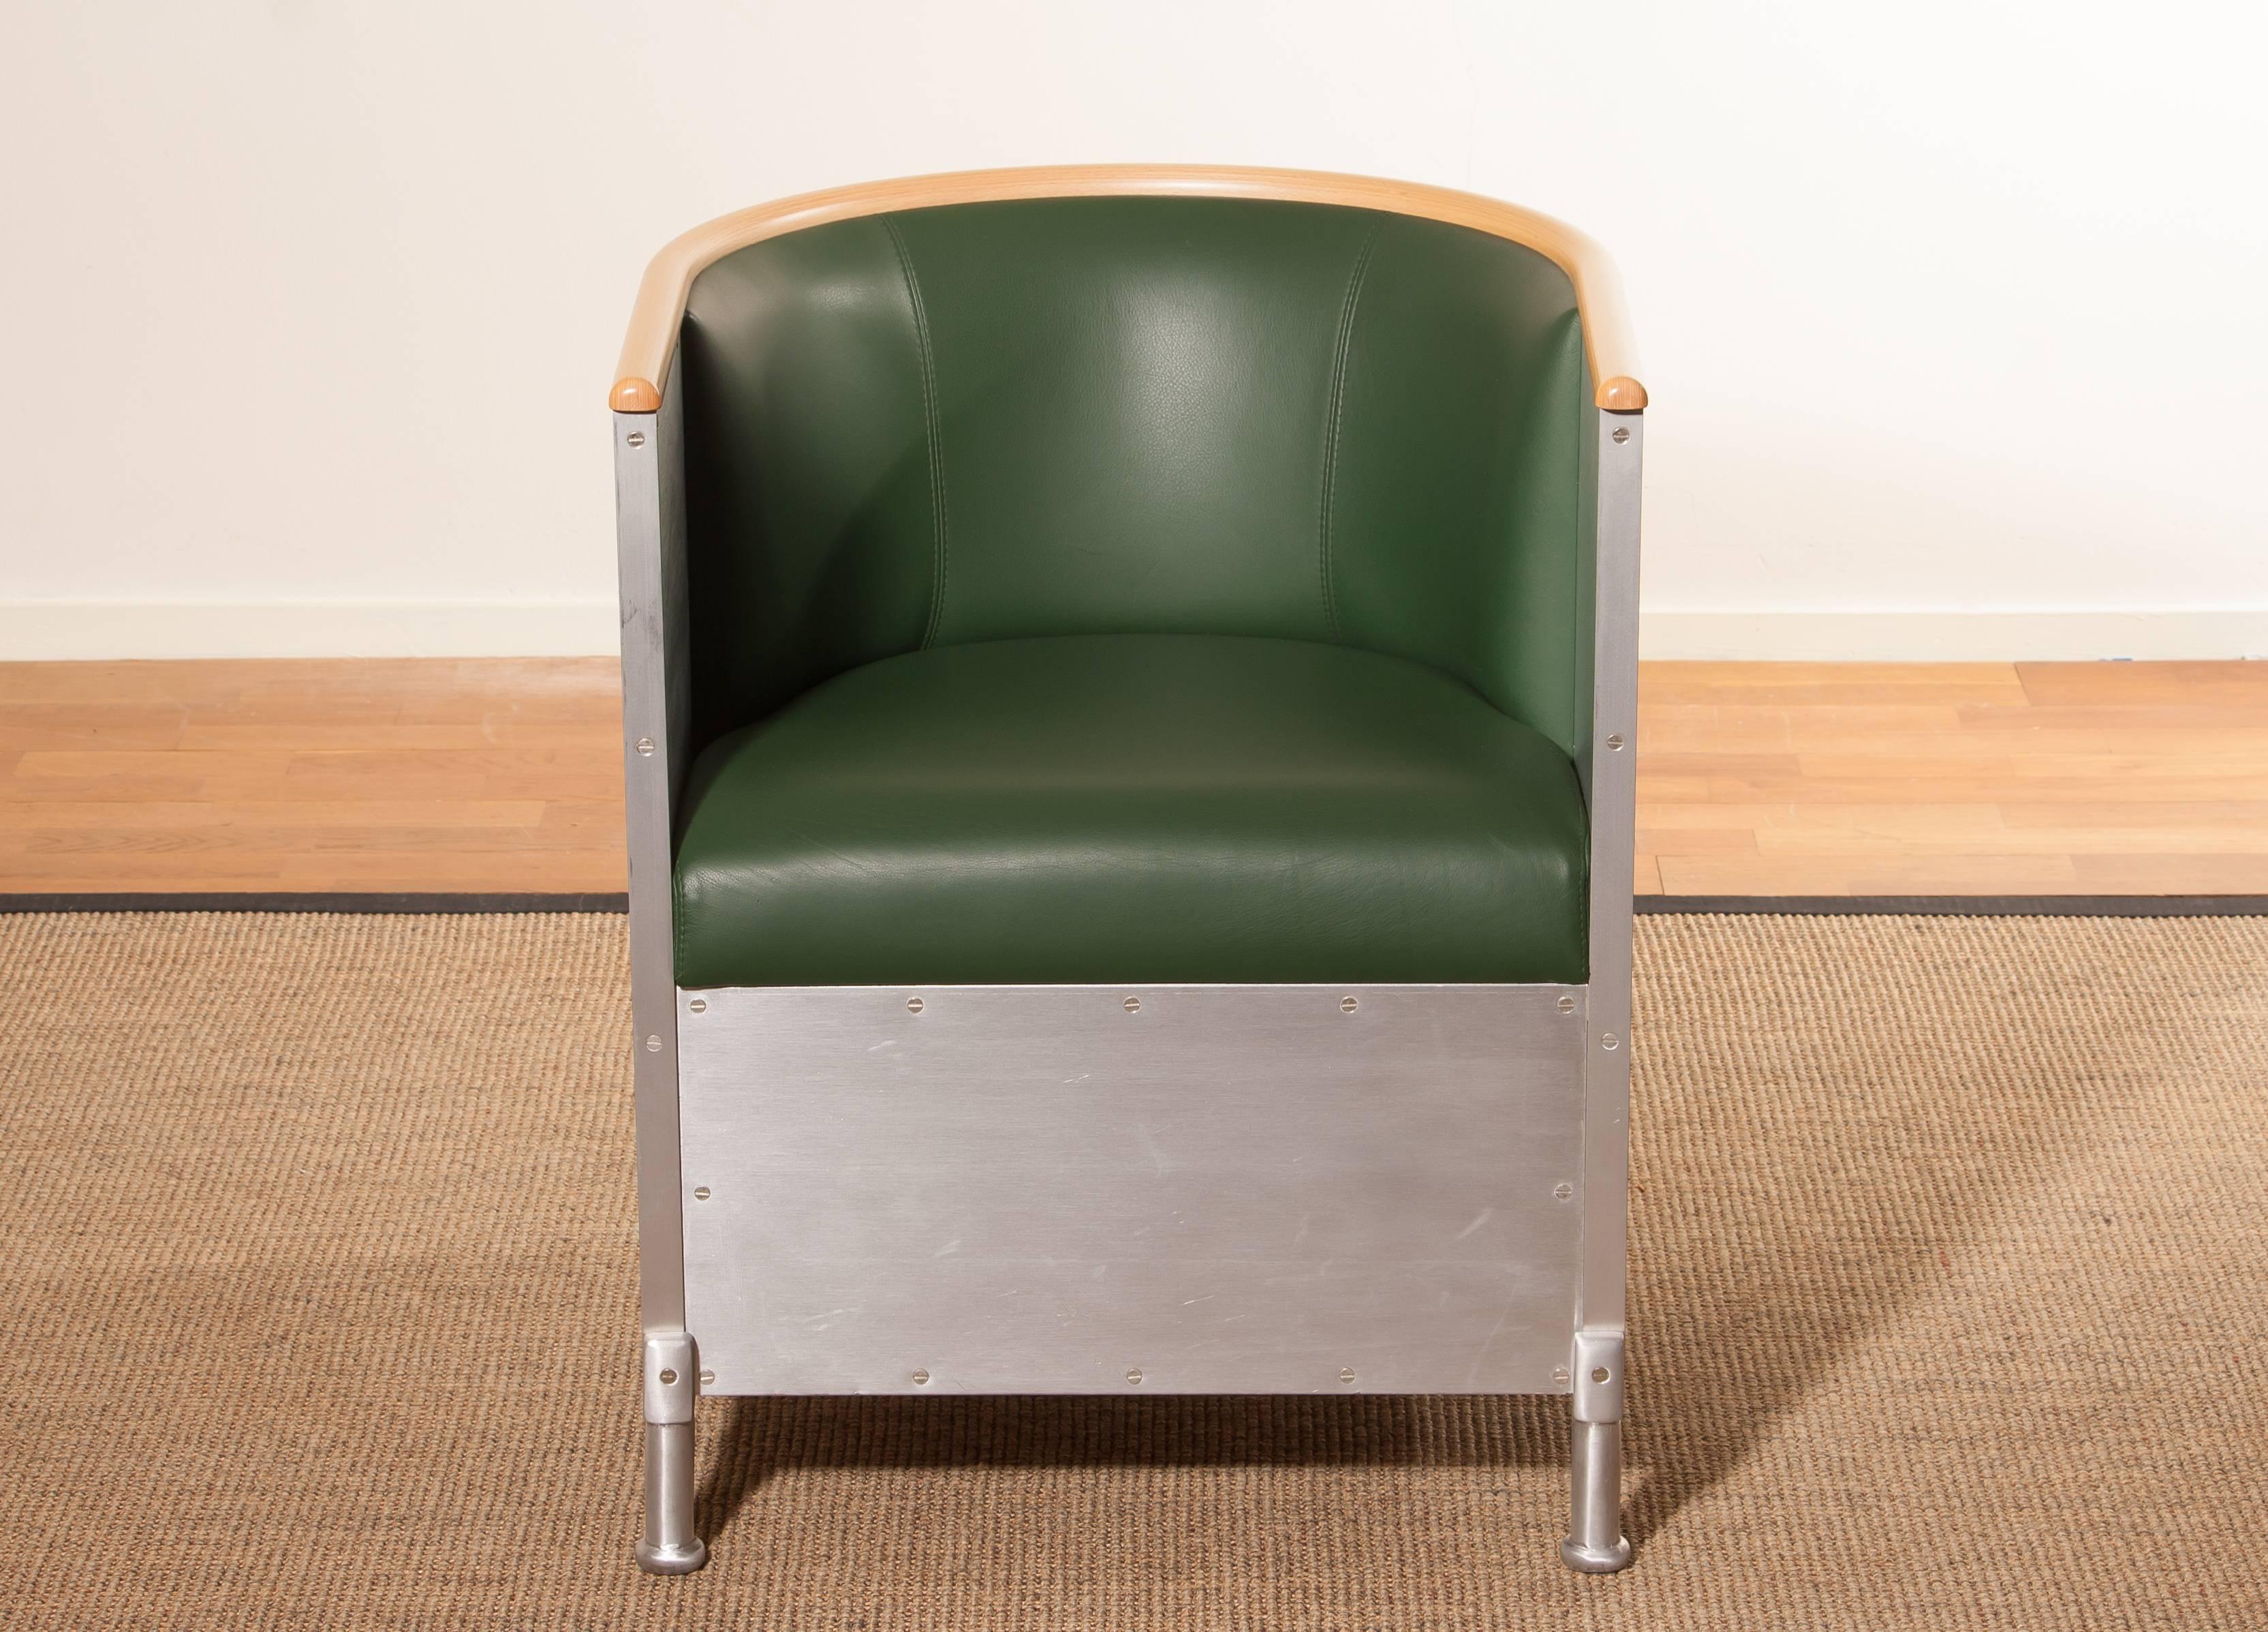 1990s, Aluminium Chair by Mats Theselius for Källemo 2